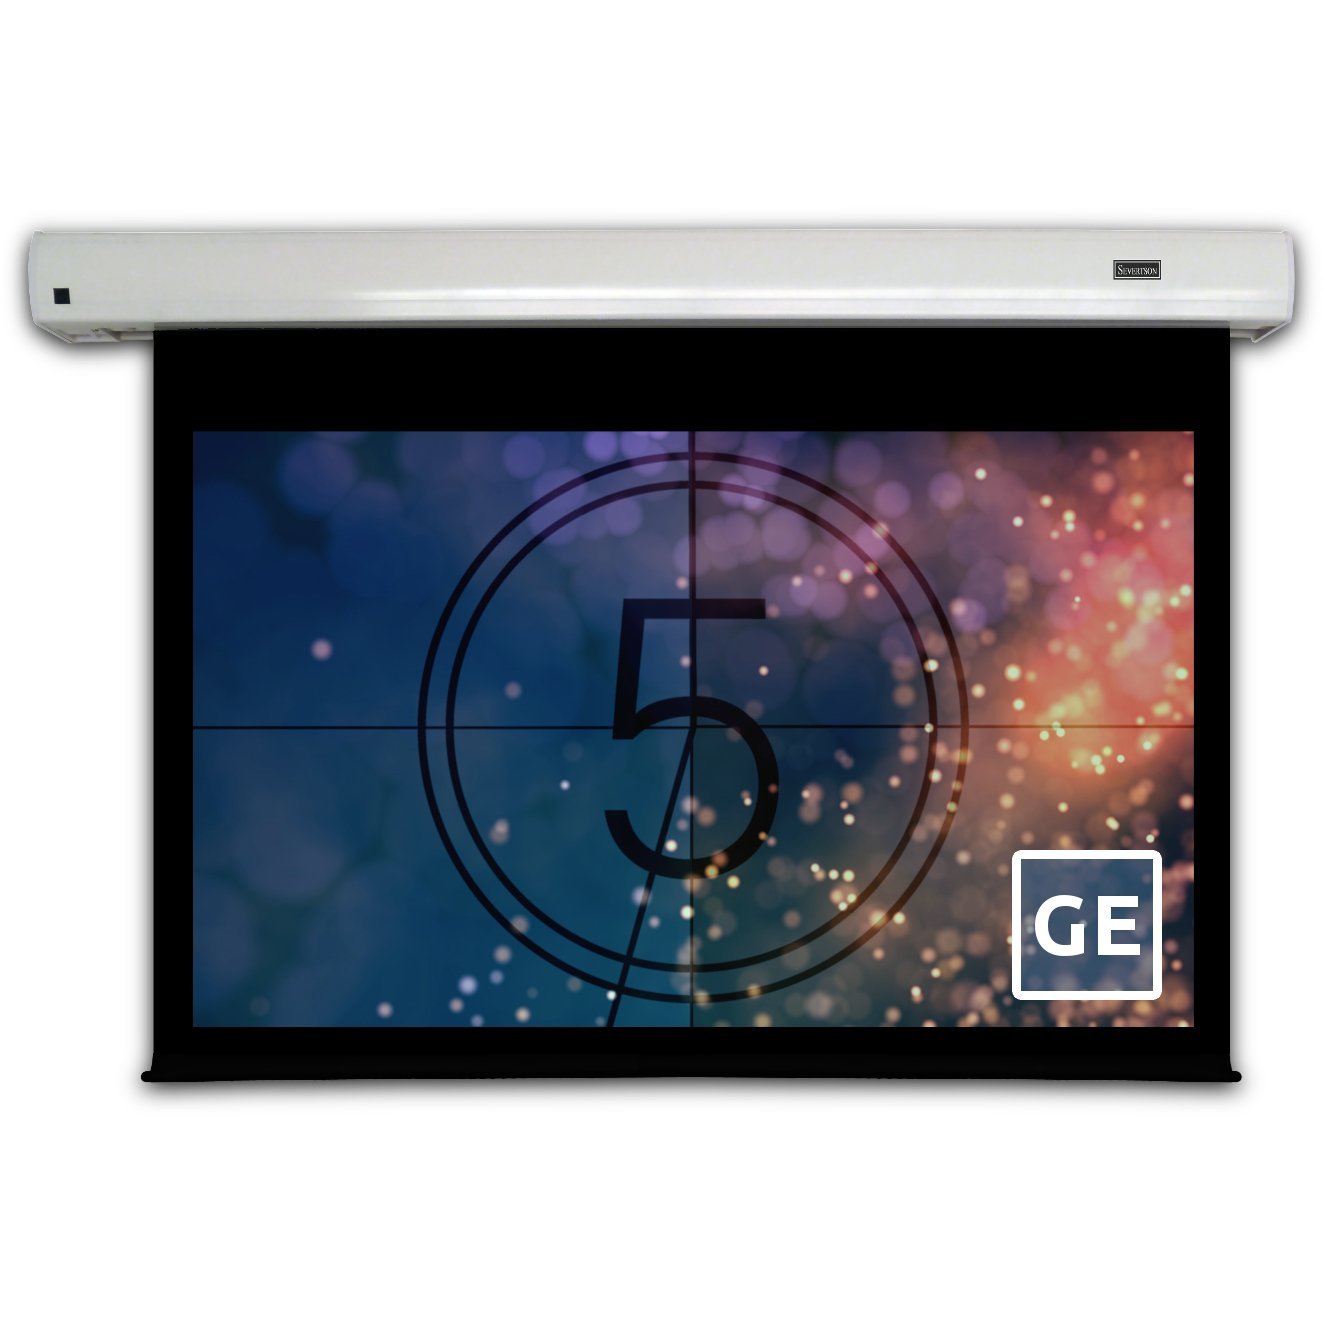 Cinema Series, ge Screens from Severtson Screens are an ideal choice for boardrooms, classrooms, or other settings where a high-performance, affordable, retractable projection screen is needed.